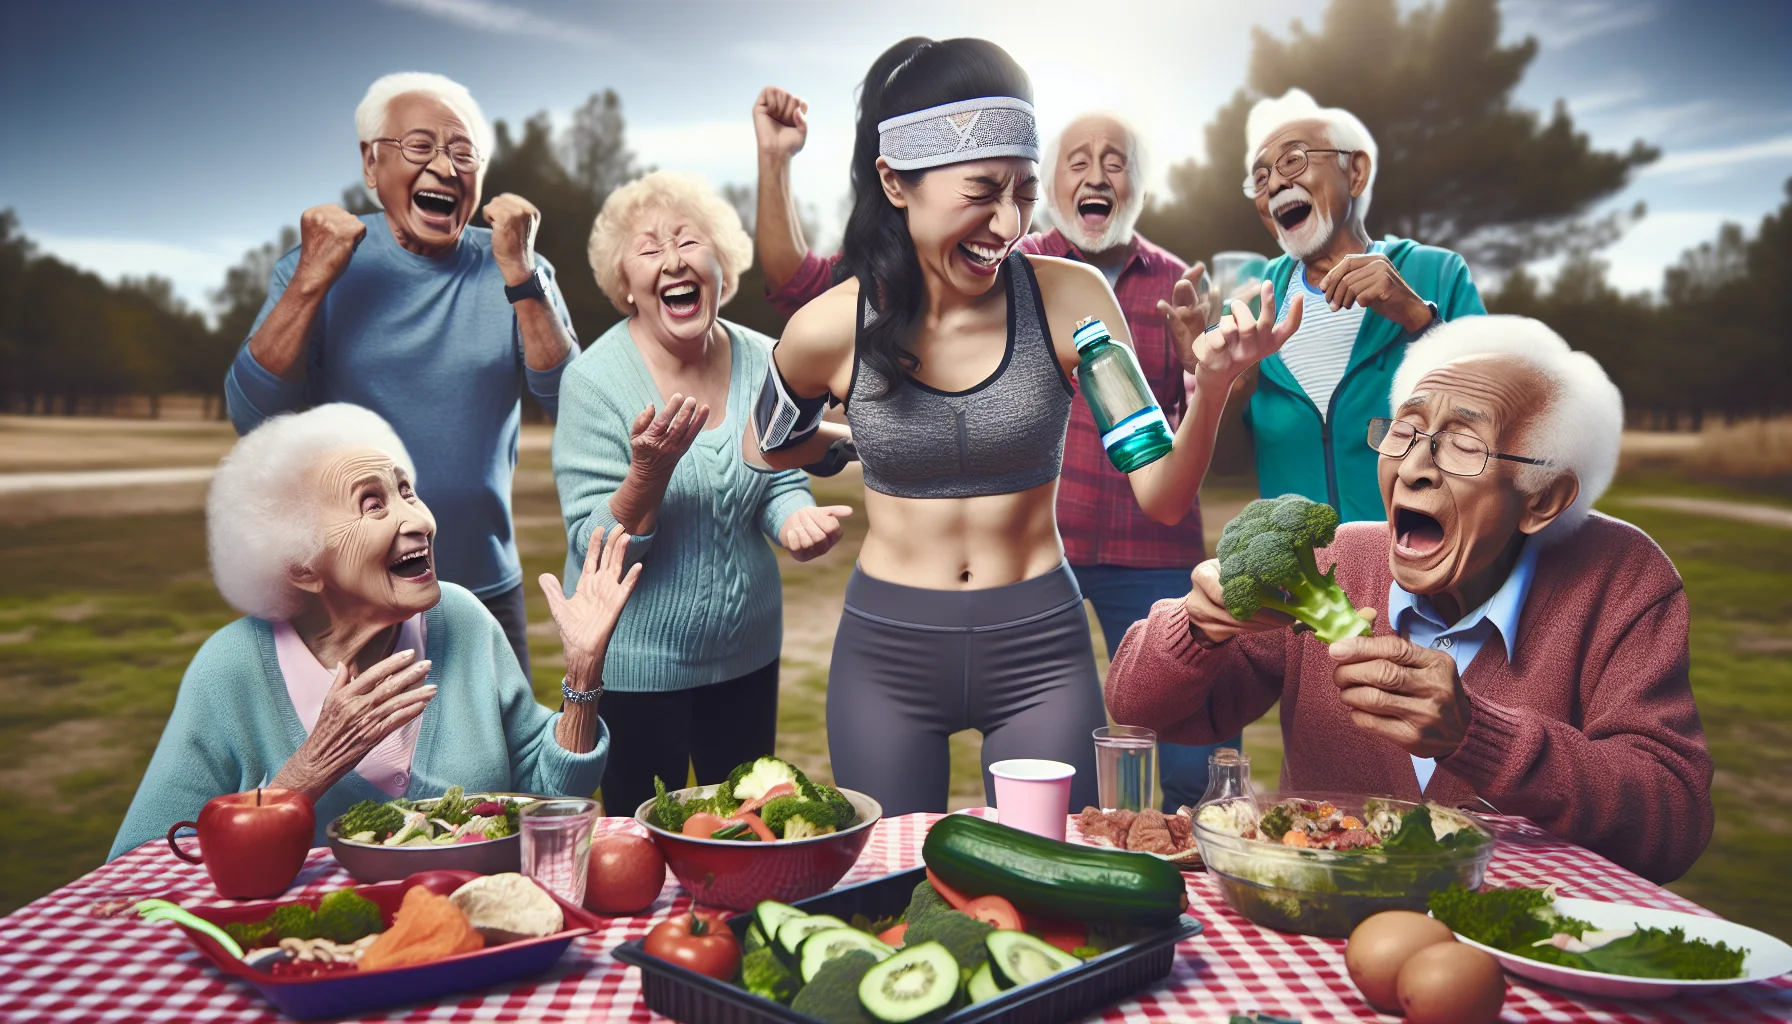 Visualize a humorous scenario involving elderly people engaging in a healthy lifestyle. In this lighthearted scenario, a group of seniors are having a picnic. A fit Middle-Eastern grandma with a headband has just finished jogging and is reaching for a bottle labeled 'Healthy Aging Formula'. Other seniors around her are laughing and enjoying various healthy dishes. A South Asian grandpa is hilariously trying to balance a broccoli on his nose, while a Caucasian granny is surprised by the zest of a lemon she just tasted for the first time. Their facial expressions emanate the joy of healthy living.